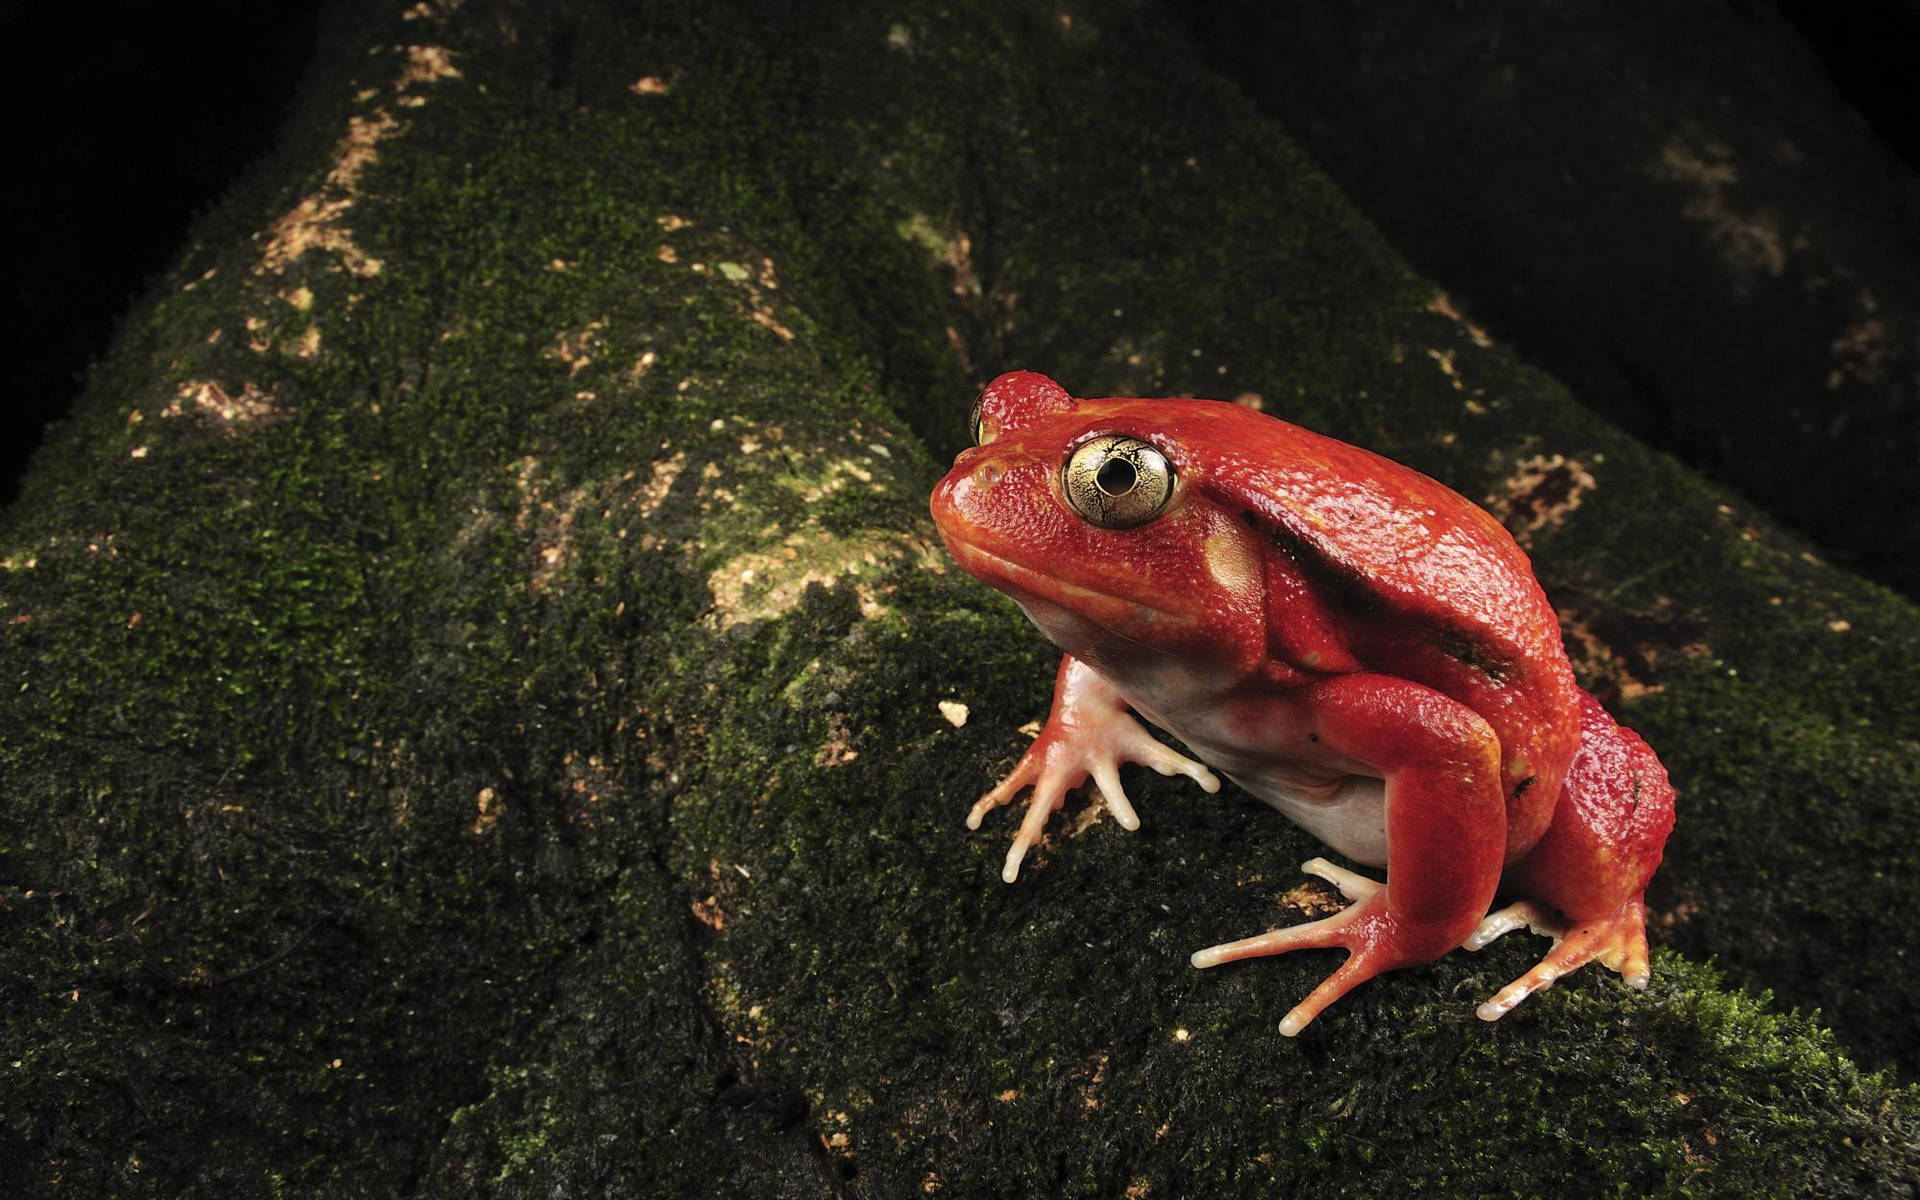 Cute Frog With Red Skin Wallpaper